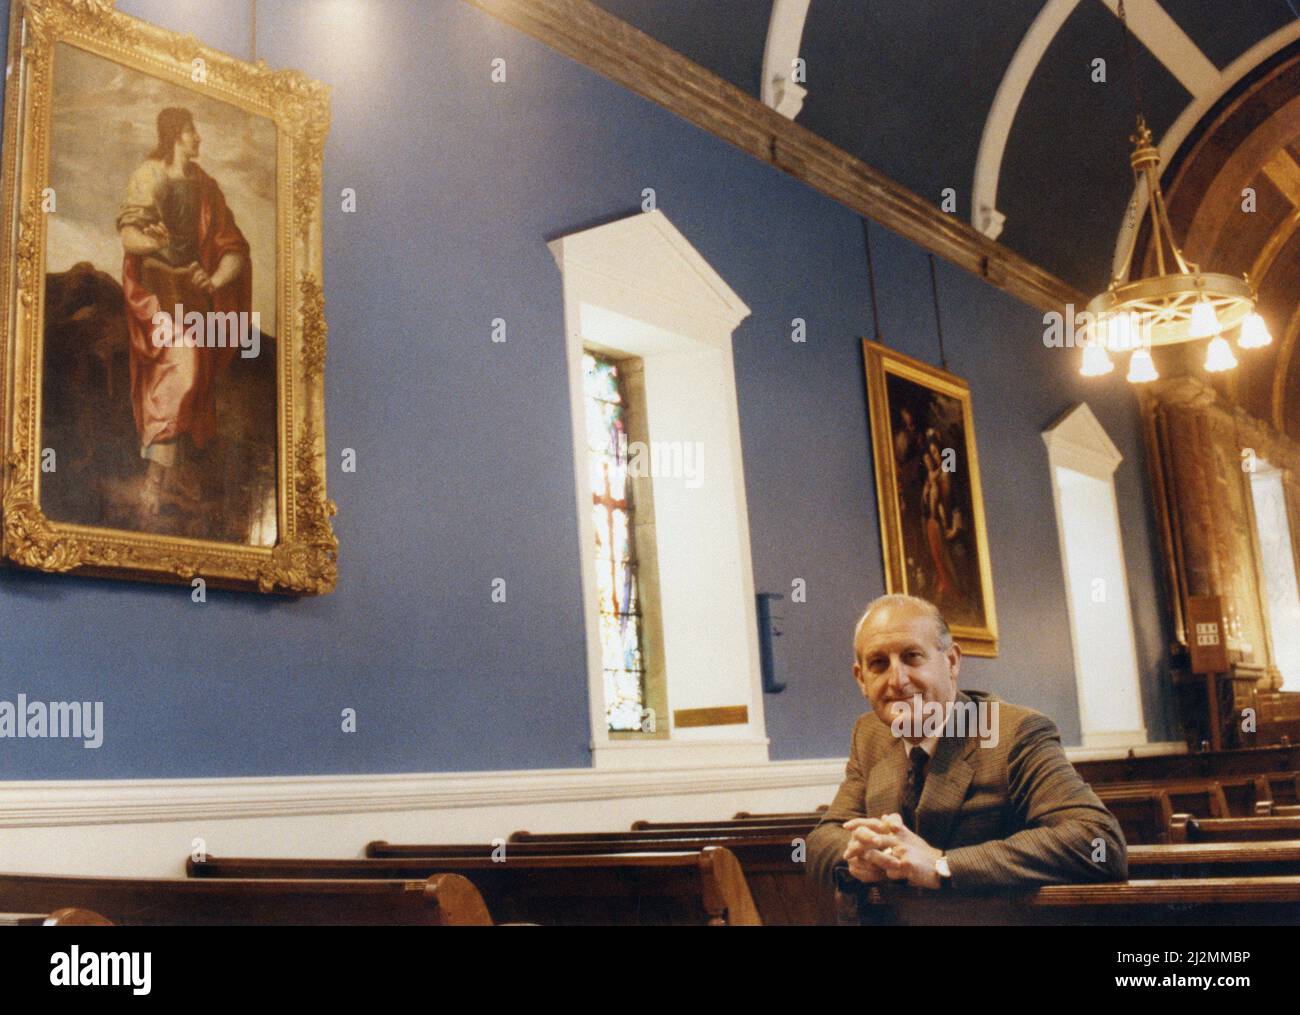 Sir John Hall, property developer (knighted 1991) and life president and former chairman of Newcastle United football club (1992 to 1997), pictured at Wynyard Hall Estate, County Durham, 10th June 1991. Our Picture Shows ... John Hall with paintings back in the chapel. He hopes he can persuade Lord Londonderry to return to his former home. Mr Hall has invested 3million pounds in returning the stately home to its former glory. Stock Photo